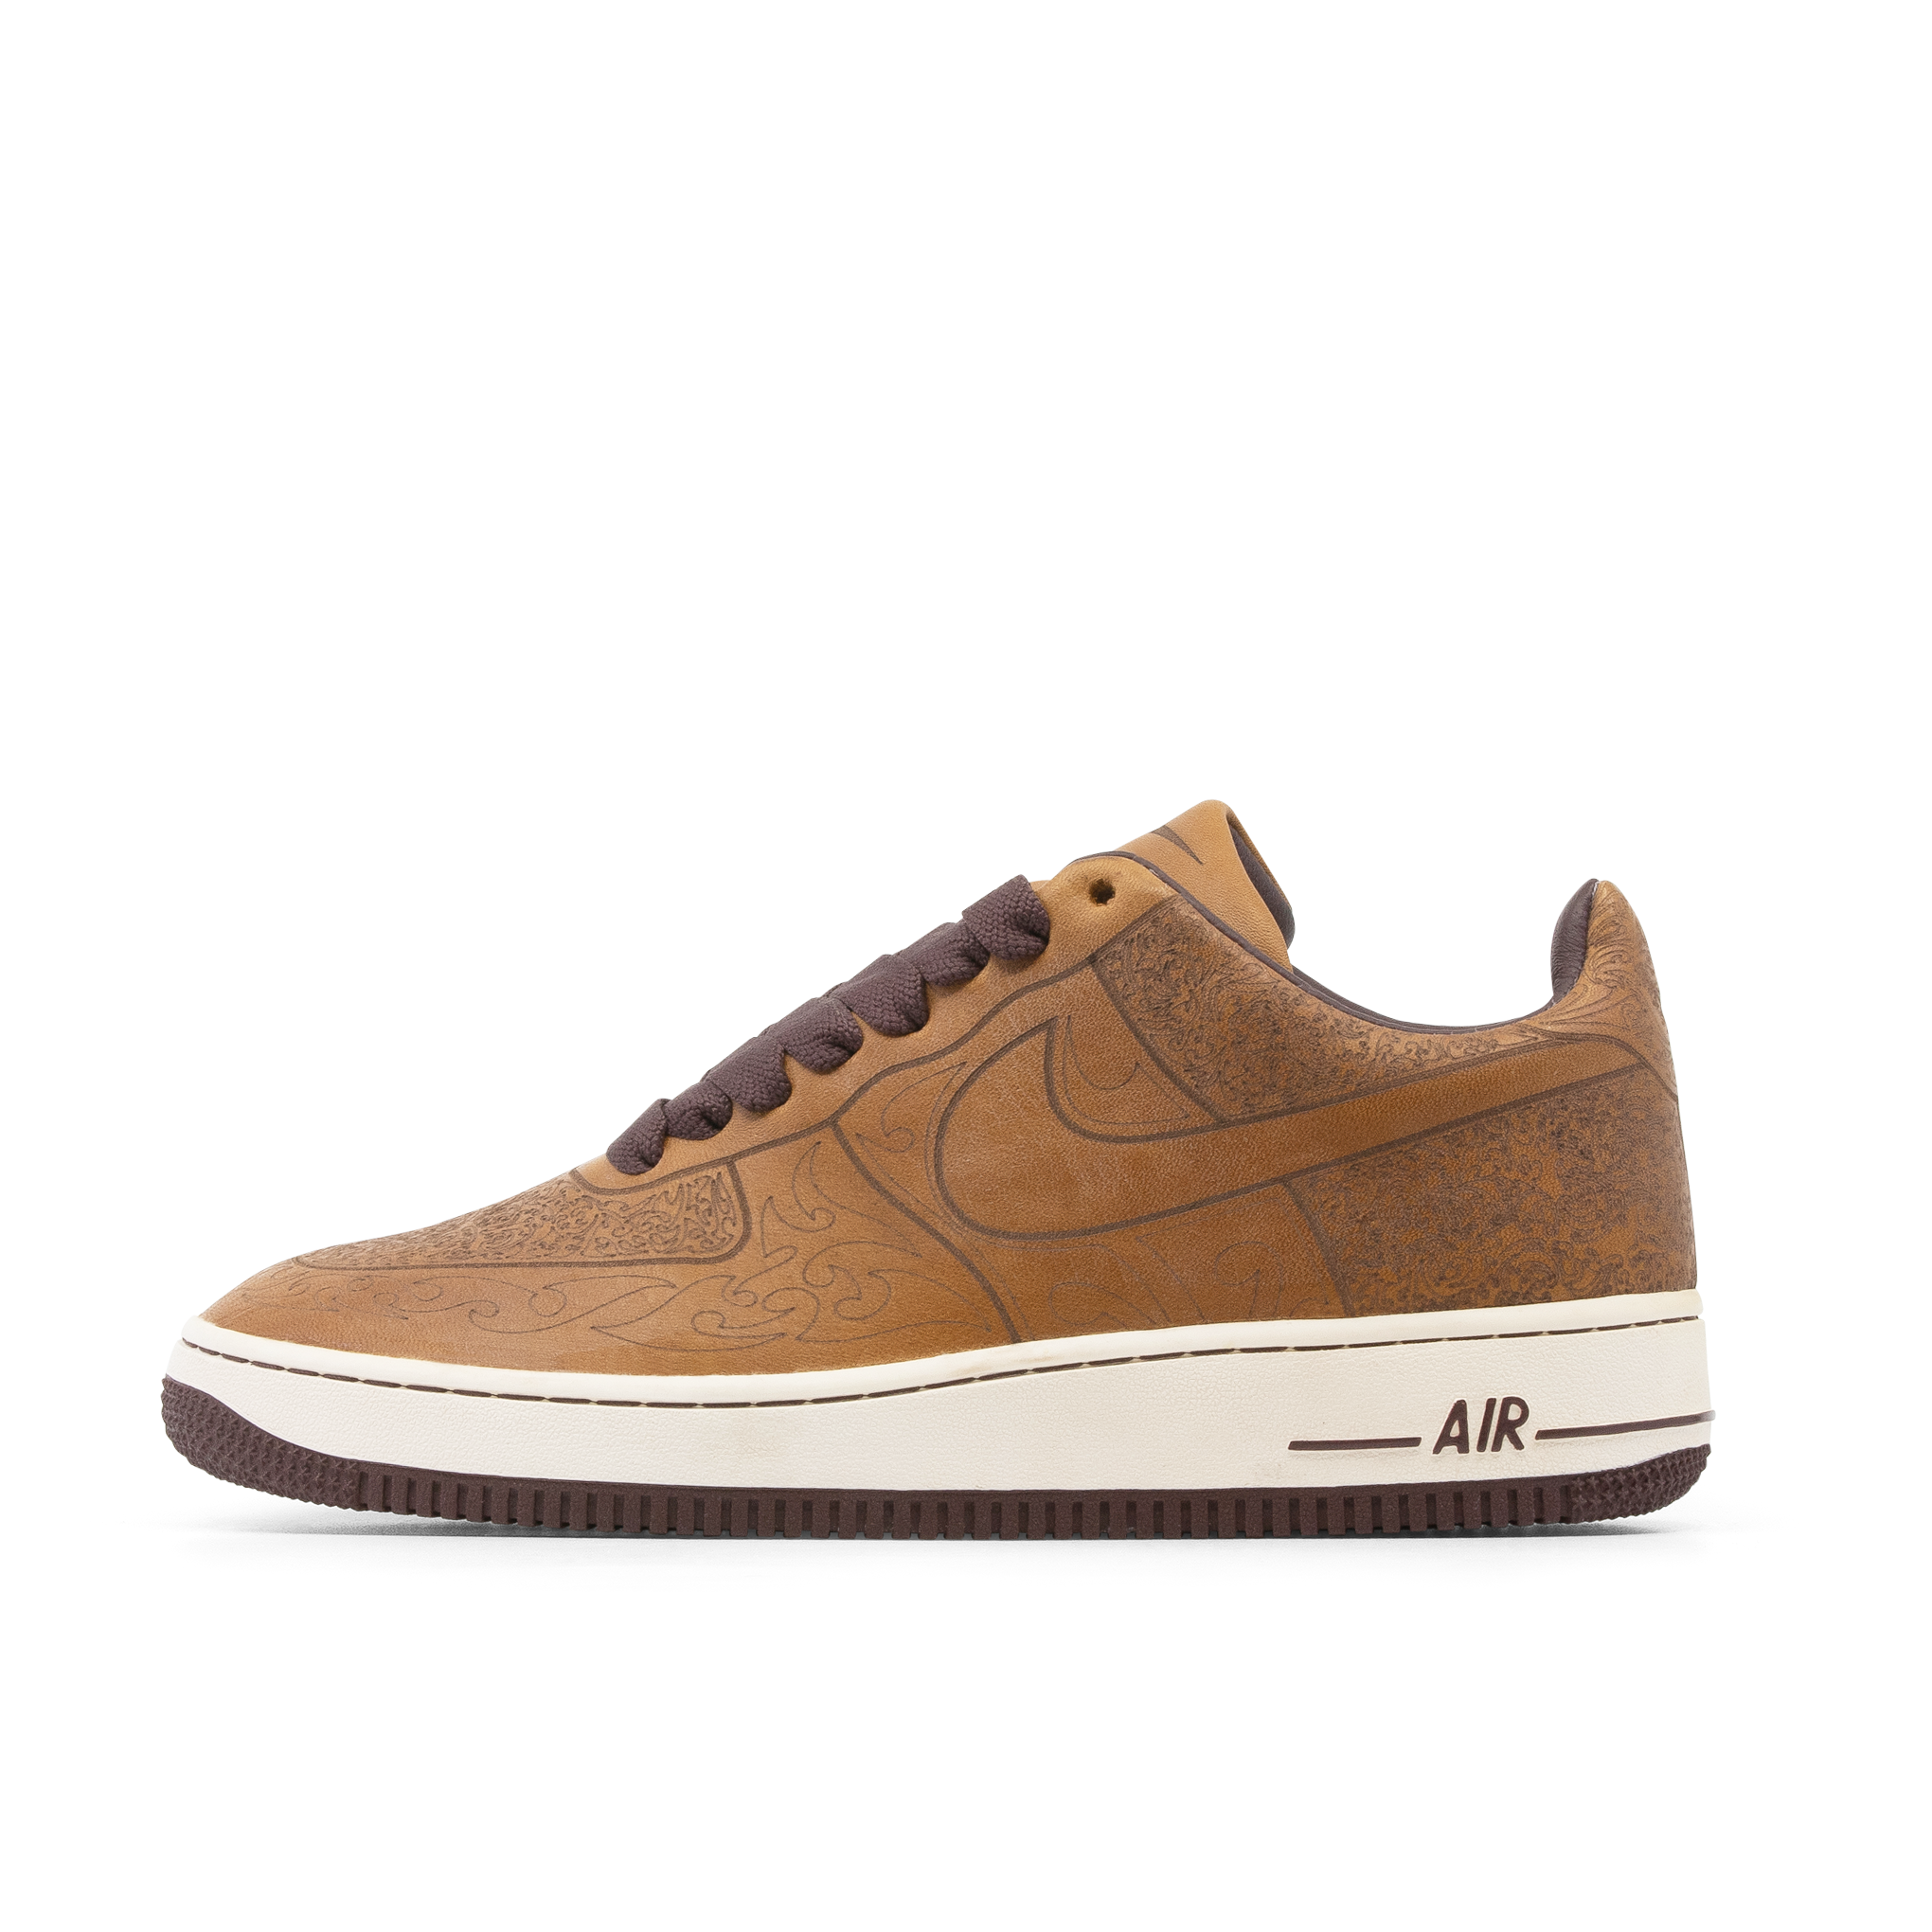 NIKE AIR FORCE 1 LOW LASER DE MARK SMITH